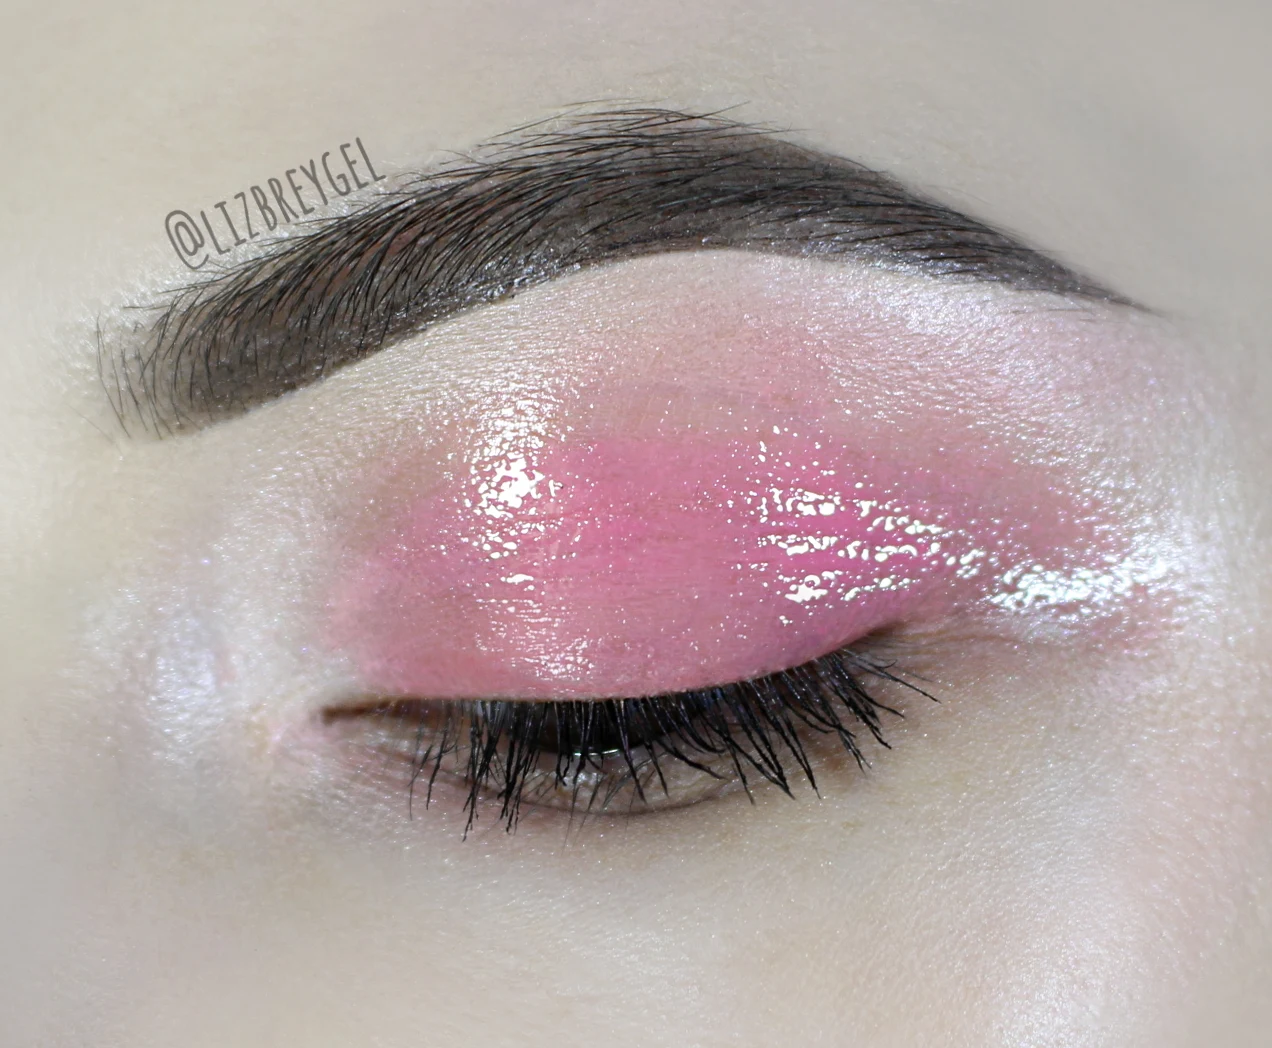 a close-up of an eye with a rose, glossy eye lid makeup look and well-defined eyebrow.